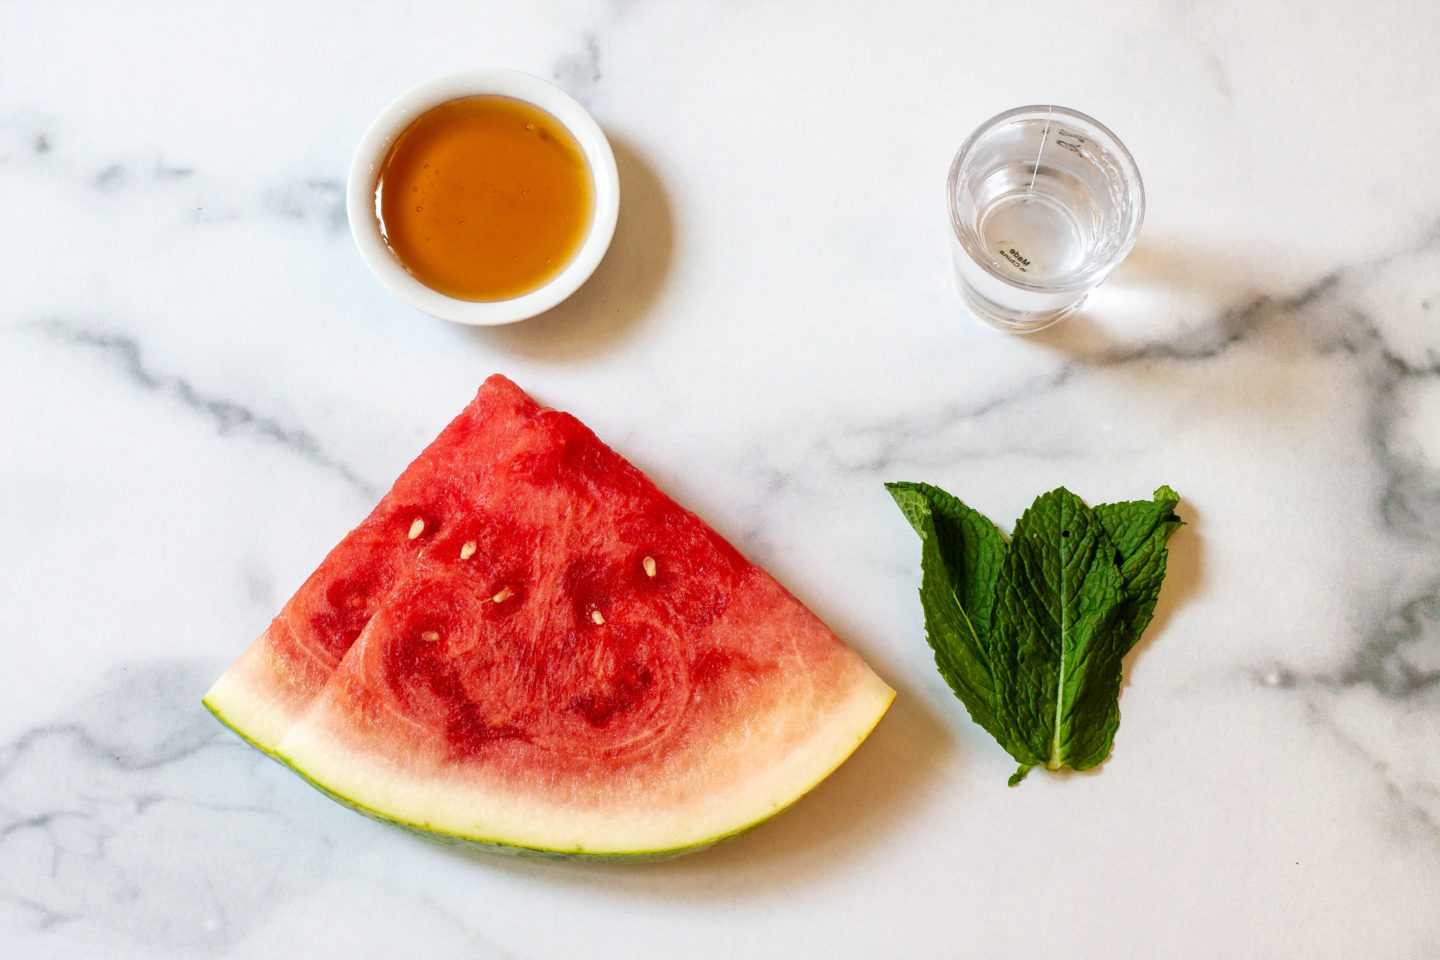 Ingredients for watermelon mojito popsicles